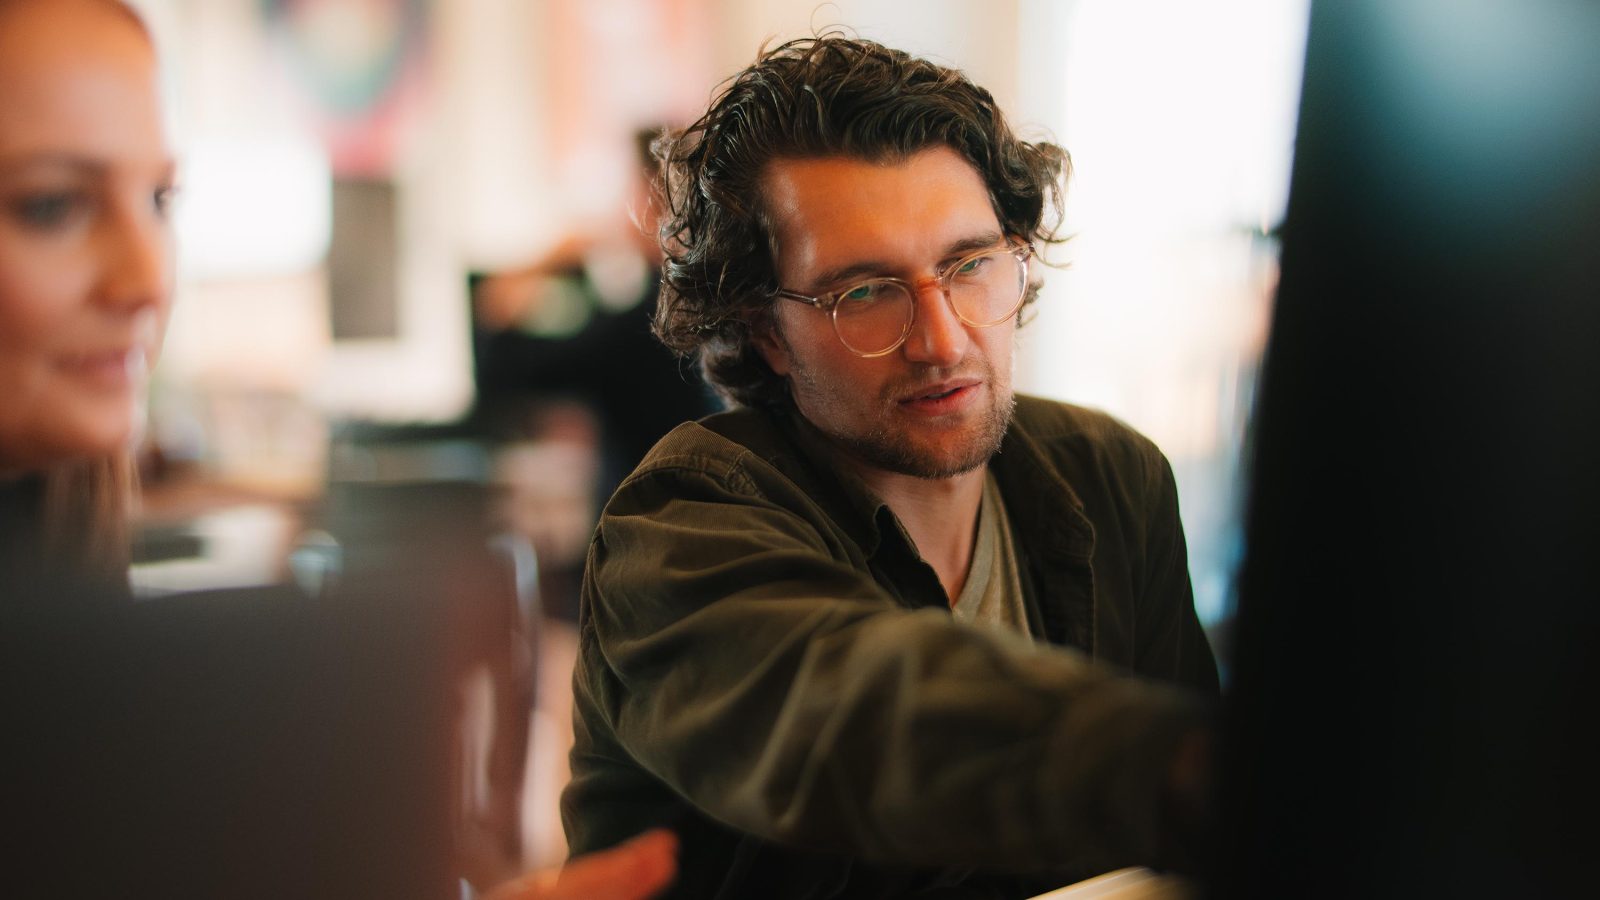 A young man with curly hair and glasses explaining something about brand design to a colleague, both focused on a computer screen in a brightly lit office.